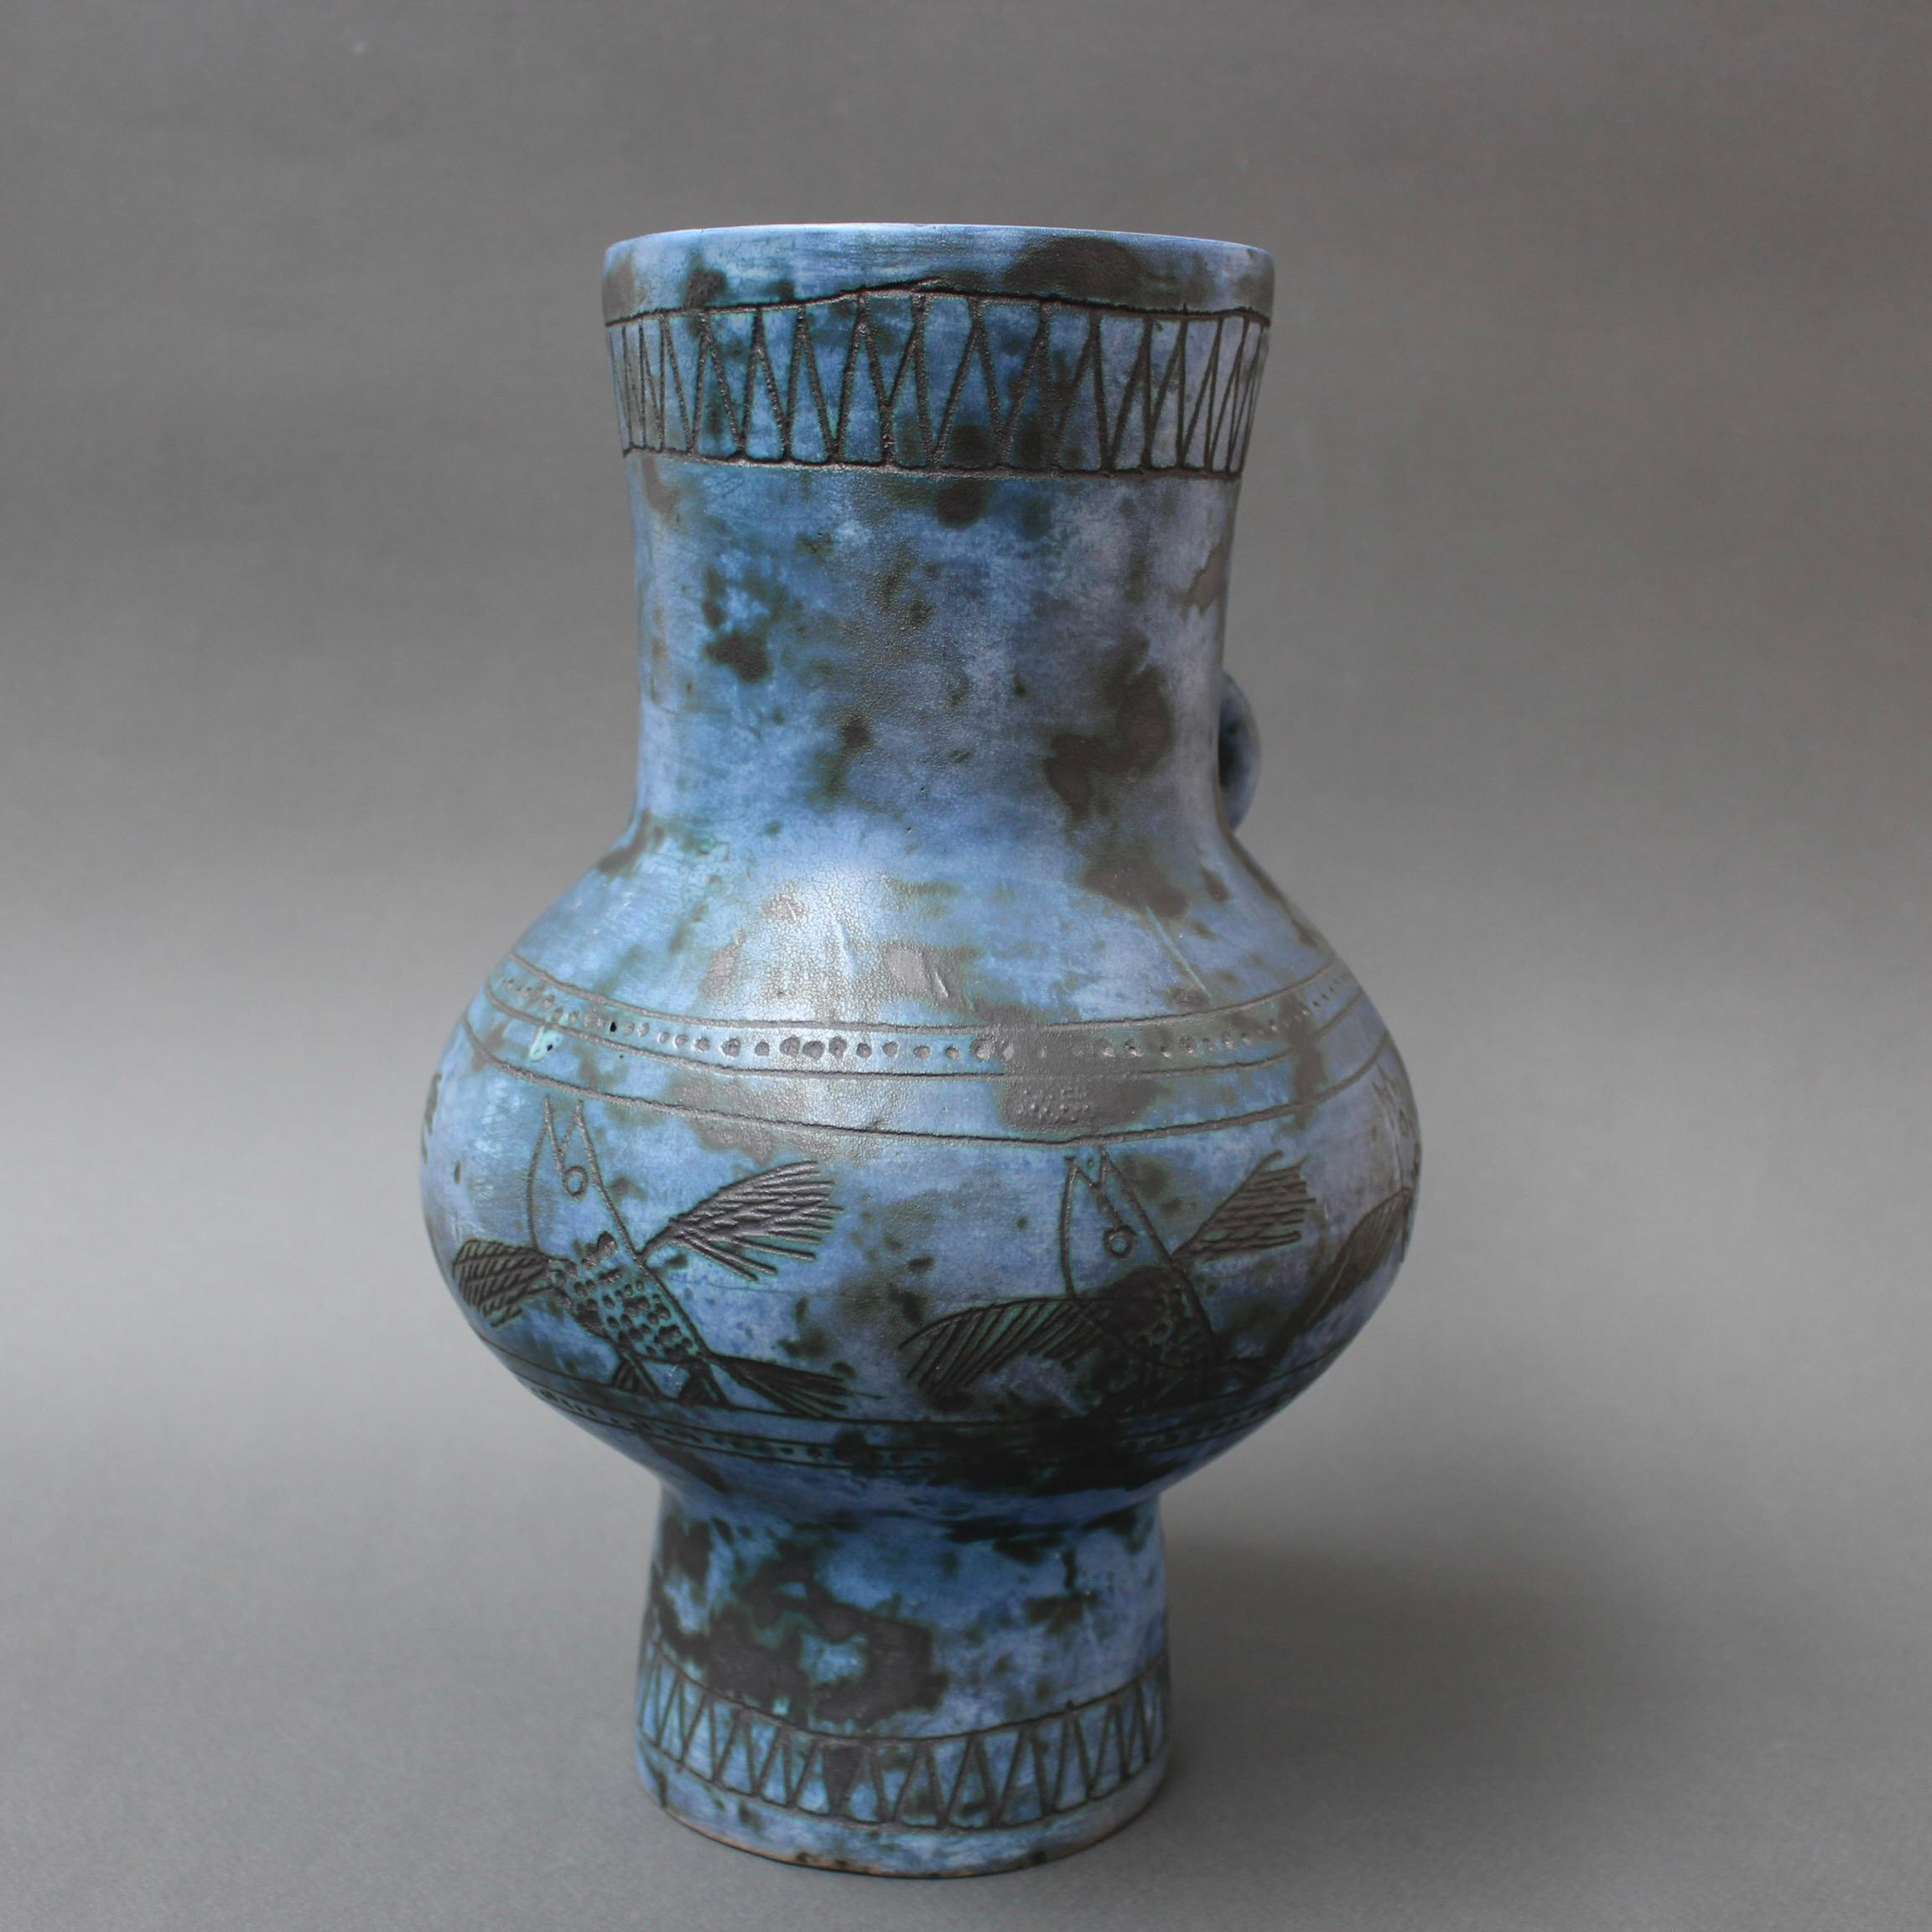 Vintage French Ceramic Vase by Jacques Blin, 'circa 1950s' For Sale 1